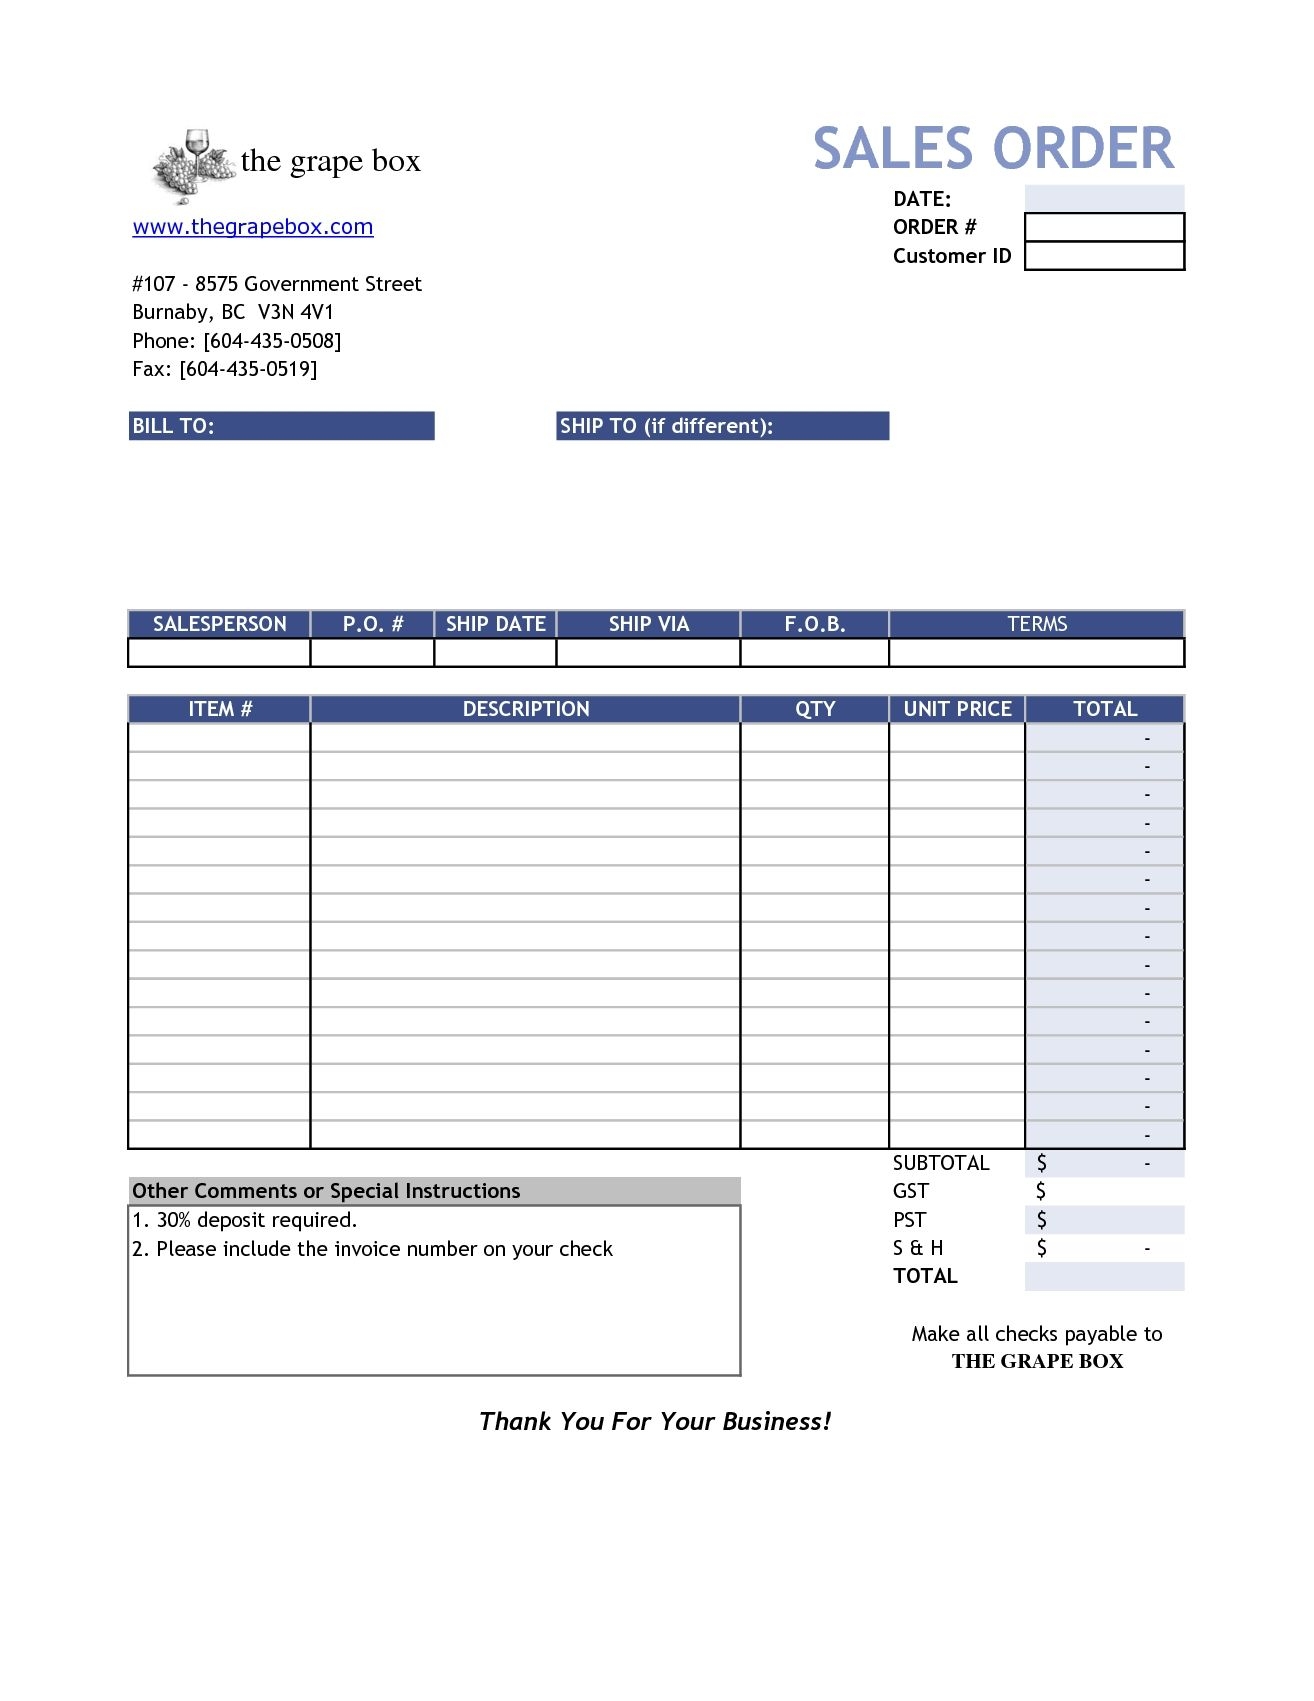 sales invoice template invoice templat sales invoice form the picture of a sales invoice